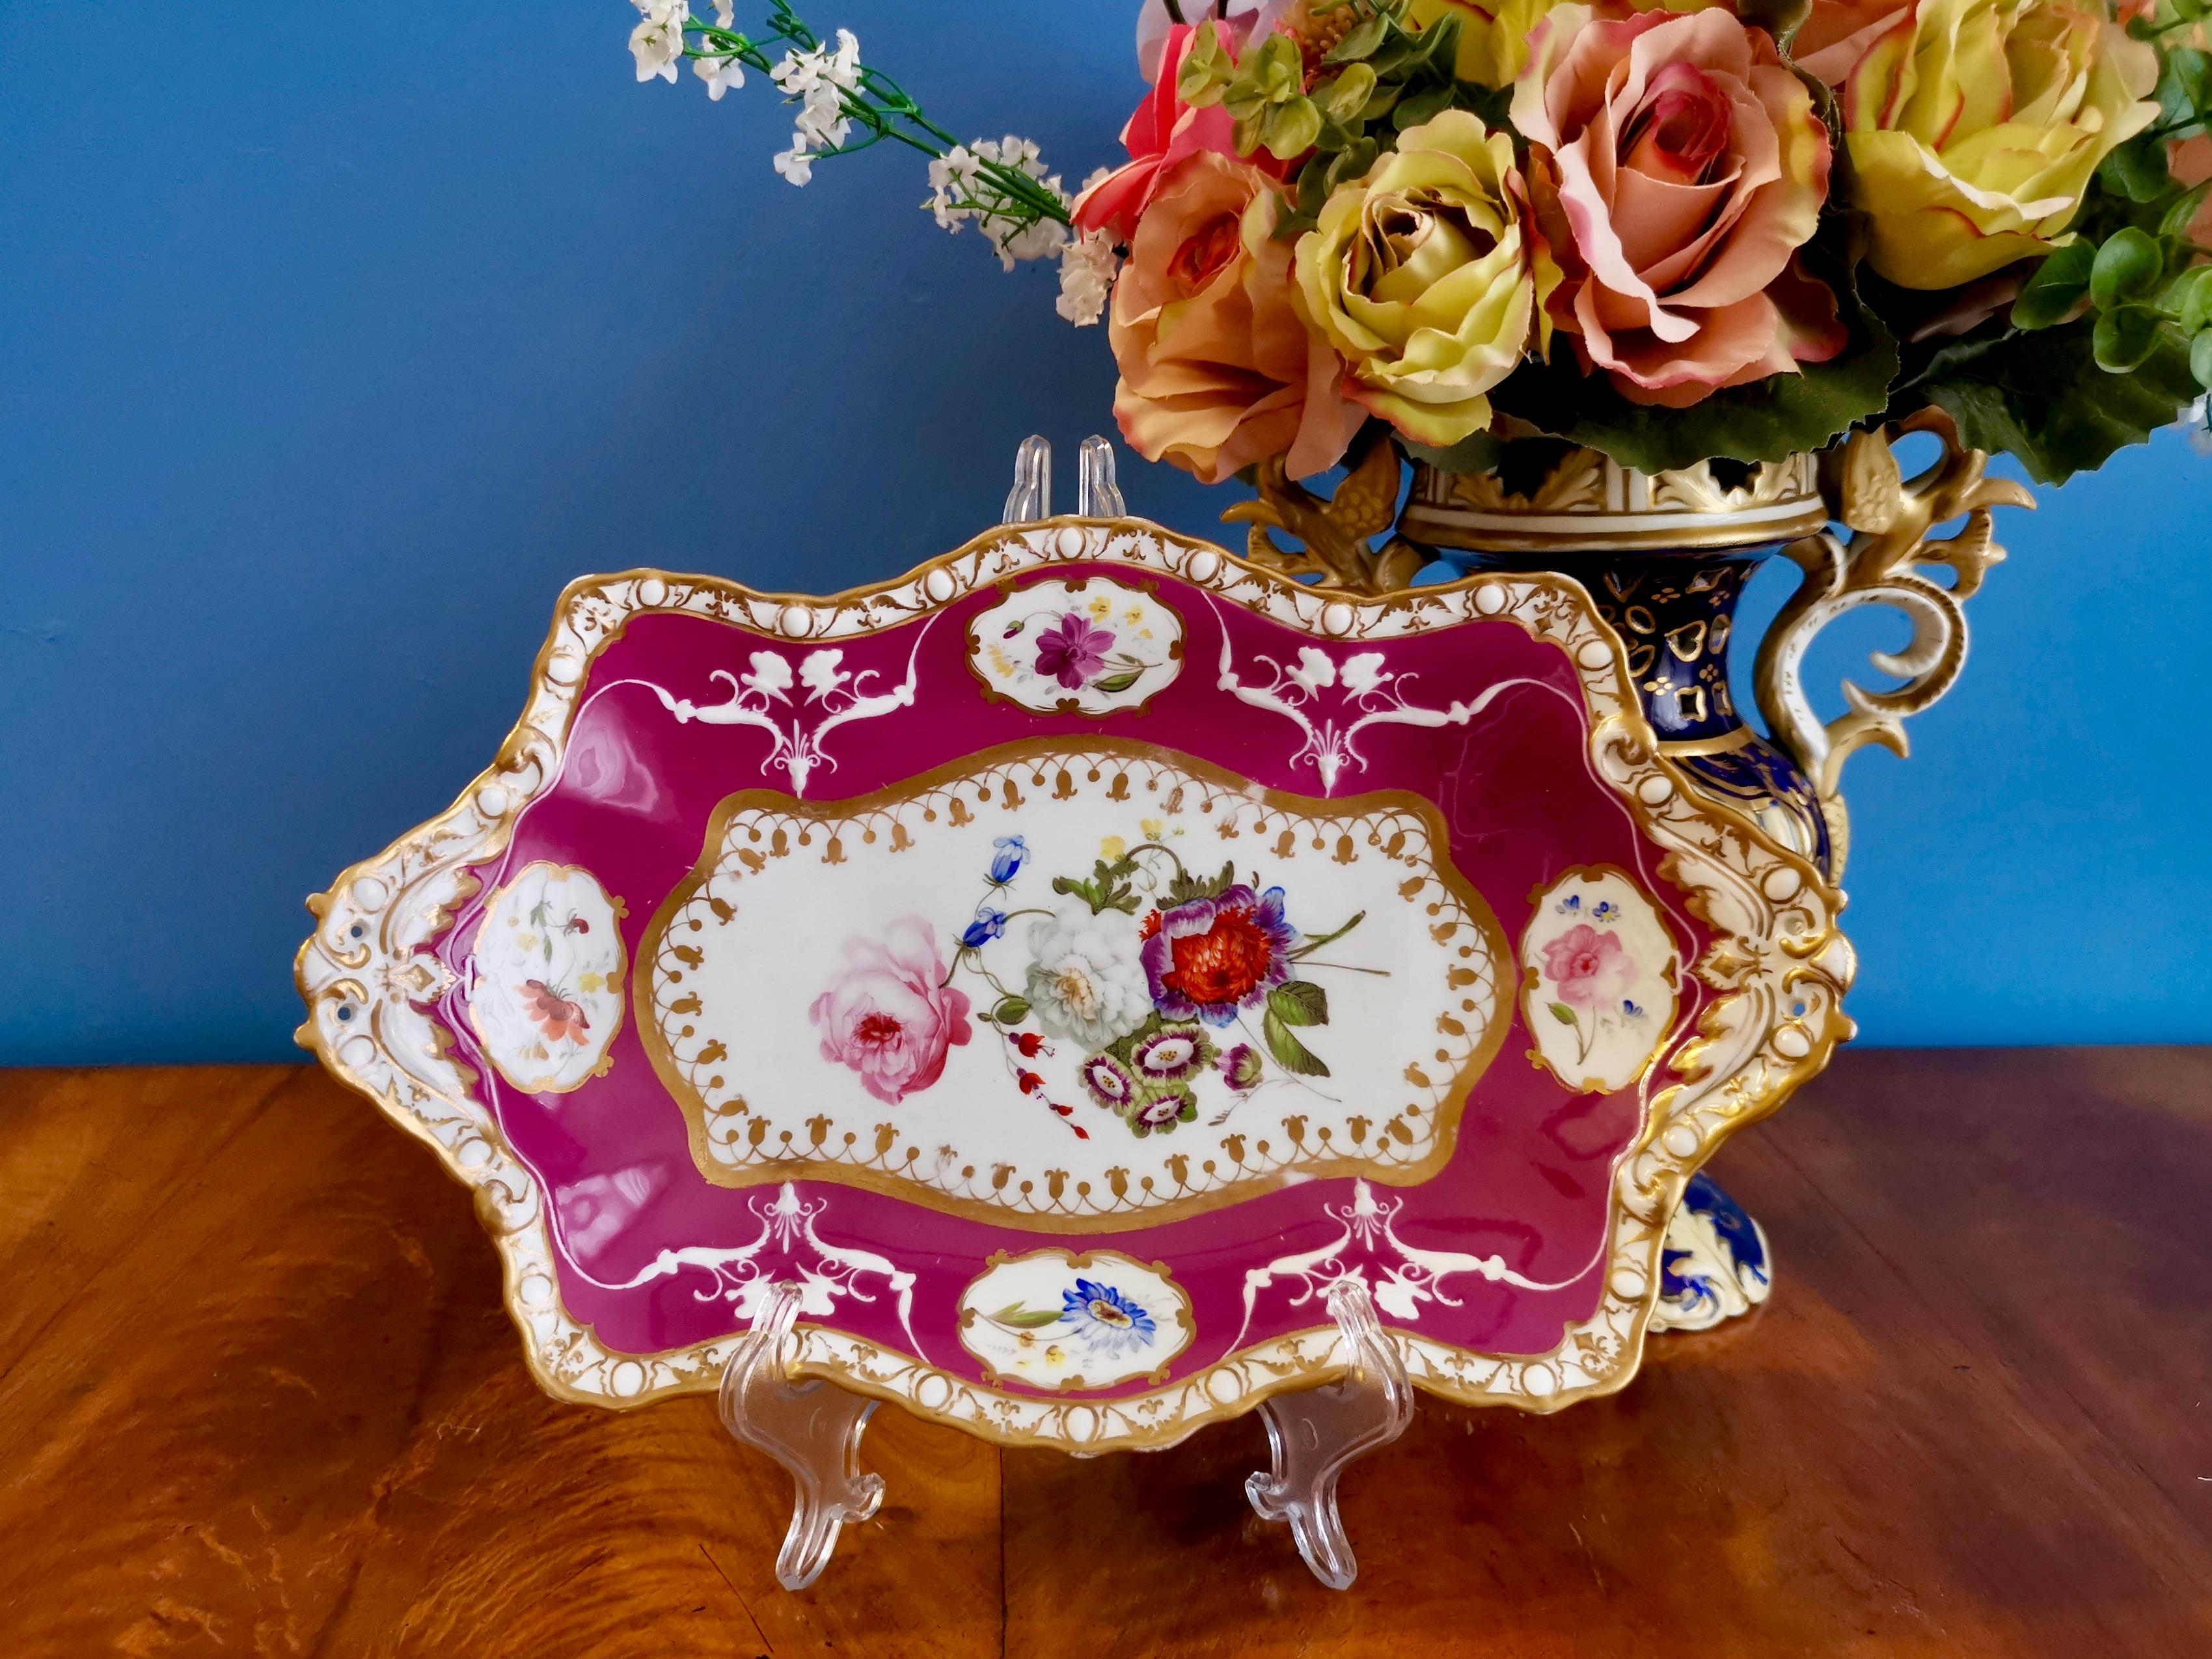 This is a stunning dessert serving dish made by Spode in 1831. 

Spode was the great pioneer among the Georgian potters in England. Around the year 1800 he perfected the bone china recipe that has been used by British potters ever since, and he